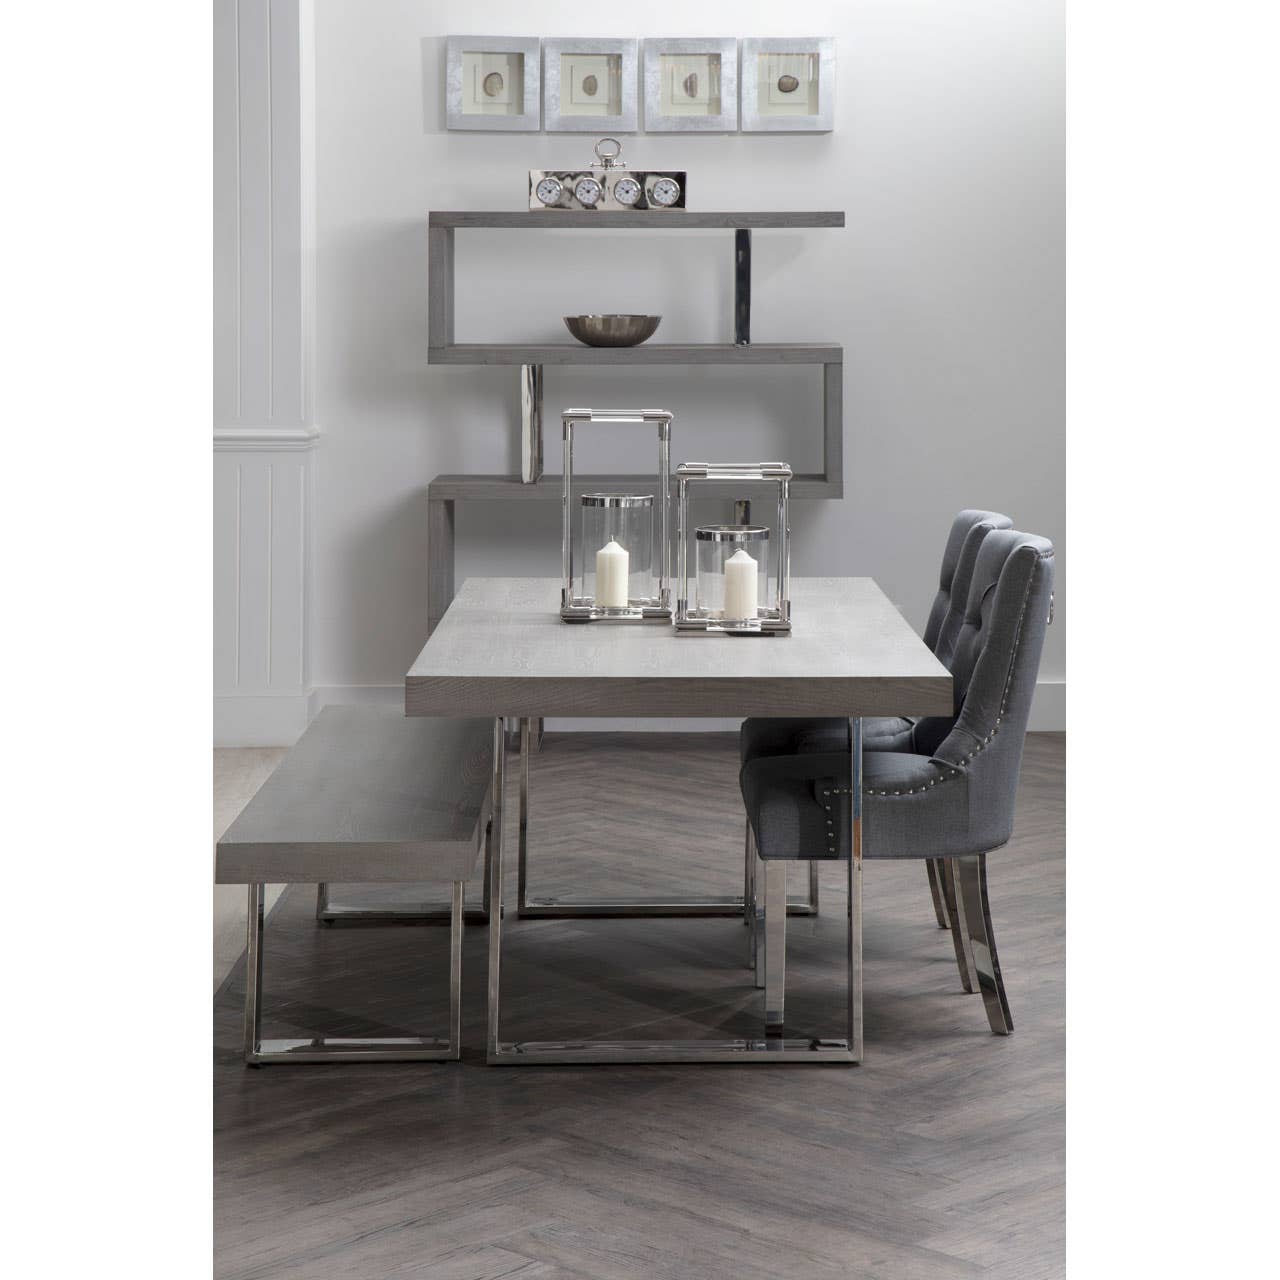 Noosa & Co. Dining Richmond Grey Dining Chair House of Isabella UK